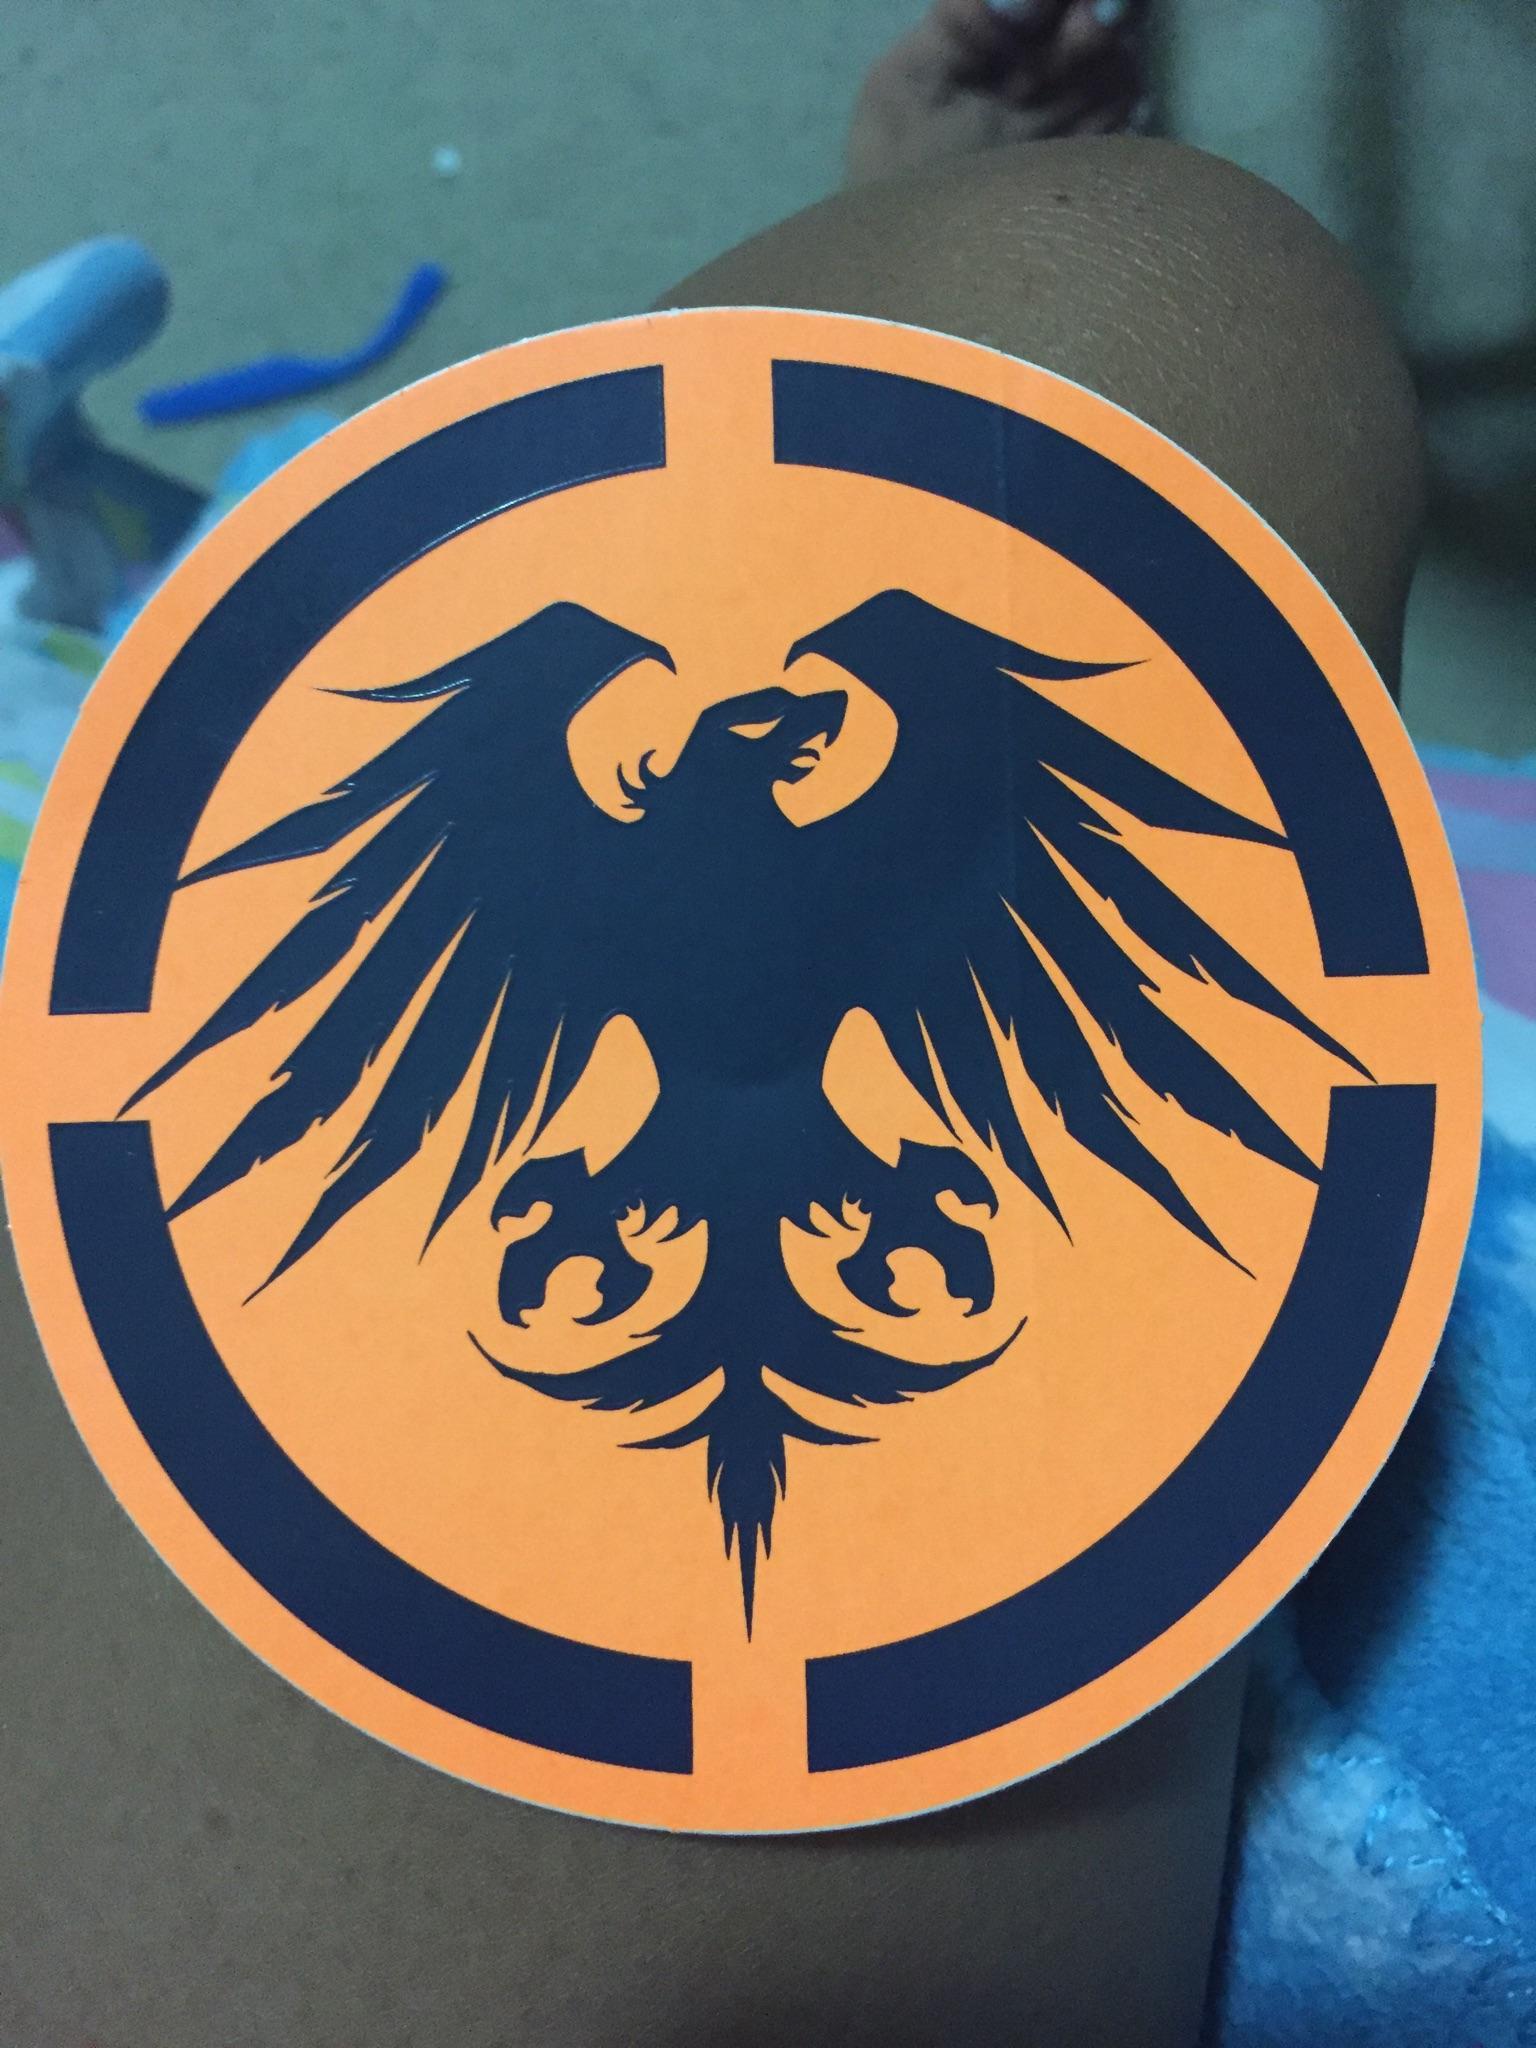 Navy Bird Logo - What is this logo? Orange and navy blue. No text. Graphic eagle ...